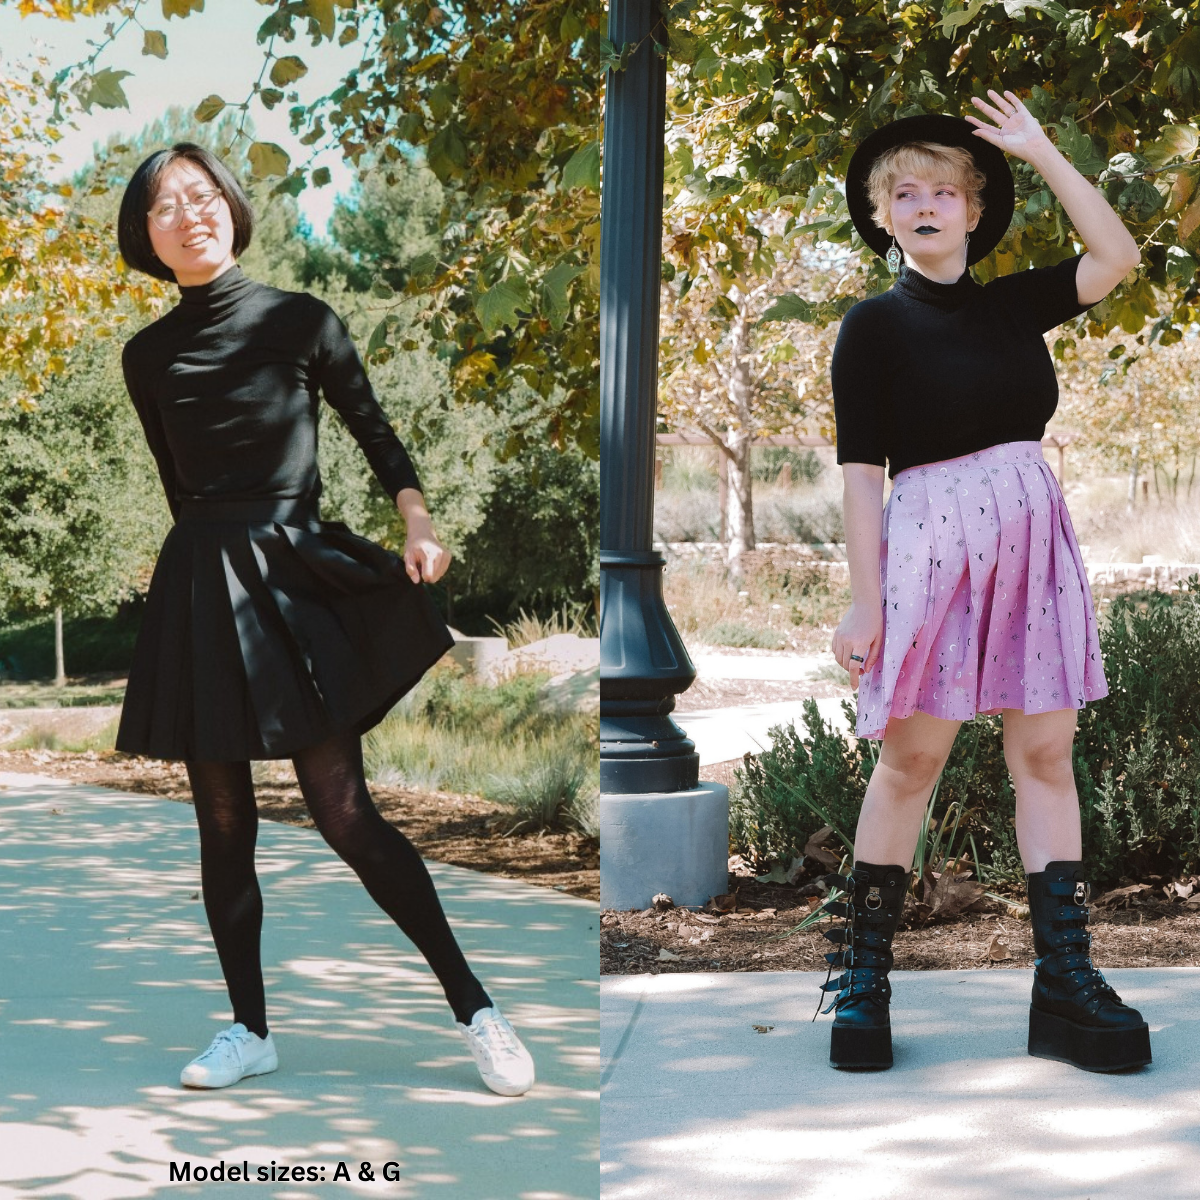 A photo of 2 people. One with a black pleated skirt (size A) with a black top, and the other in a pink starry pleated skirt (size G) with a black top.